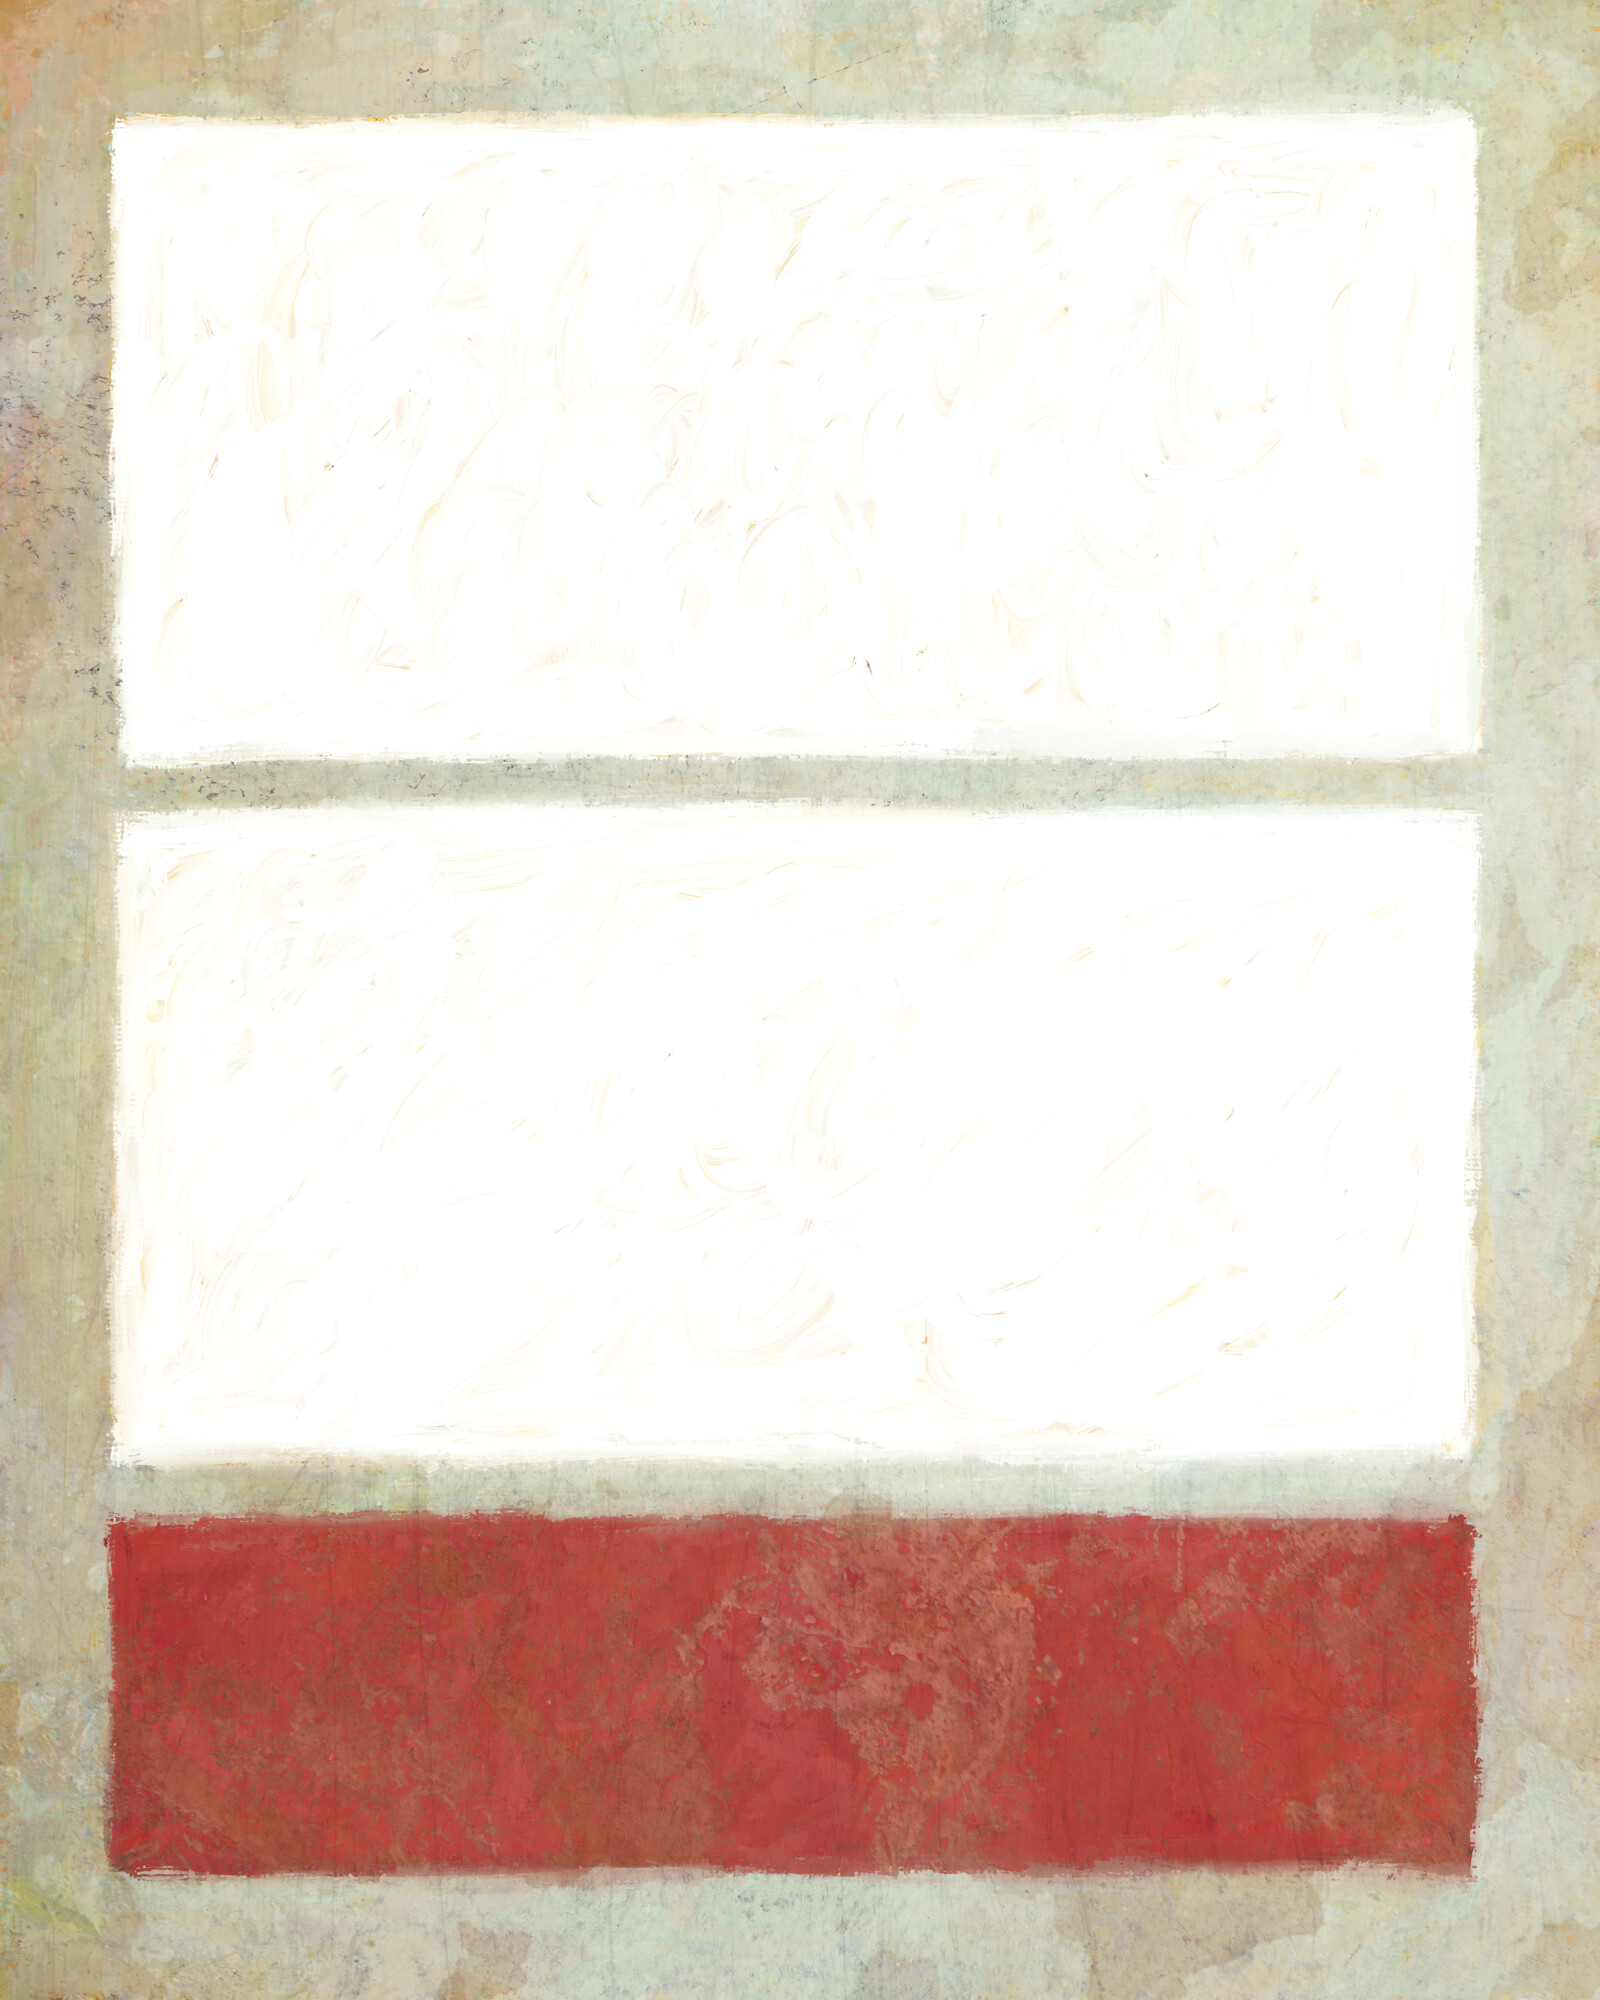 From top: a white rectangle, a white rectangle, a red rectangle.